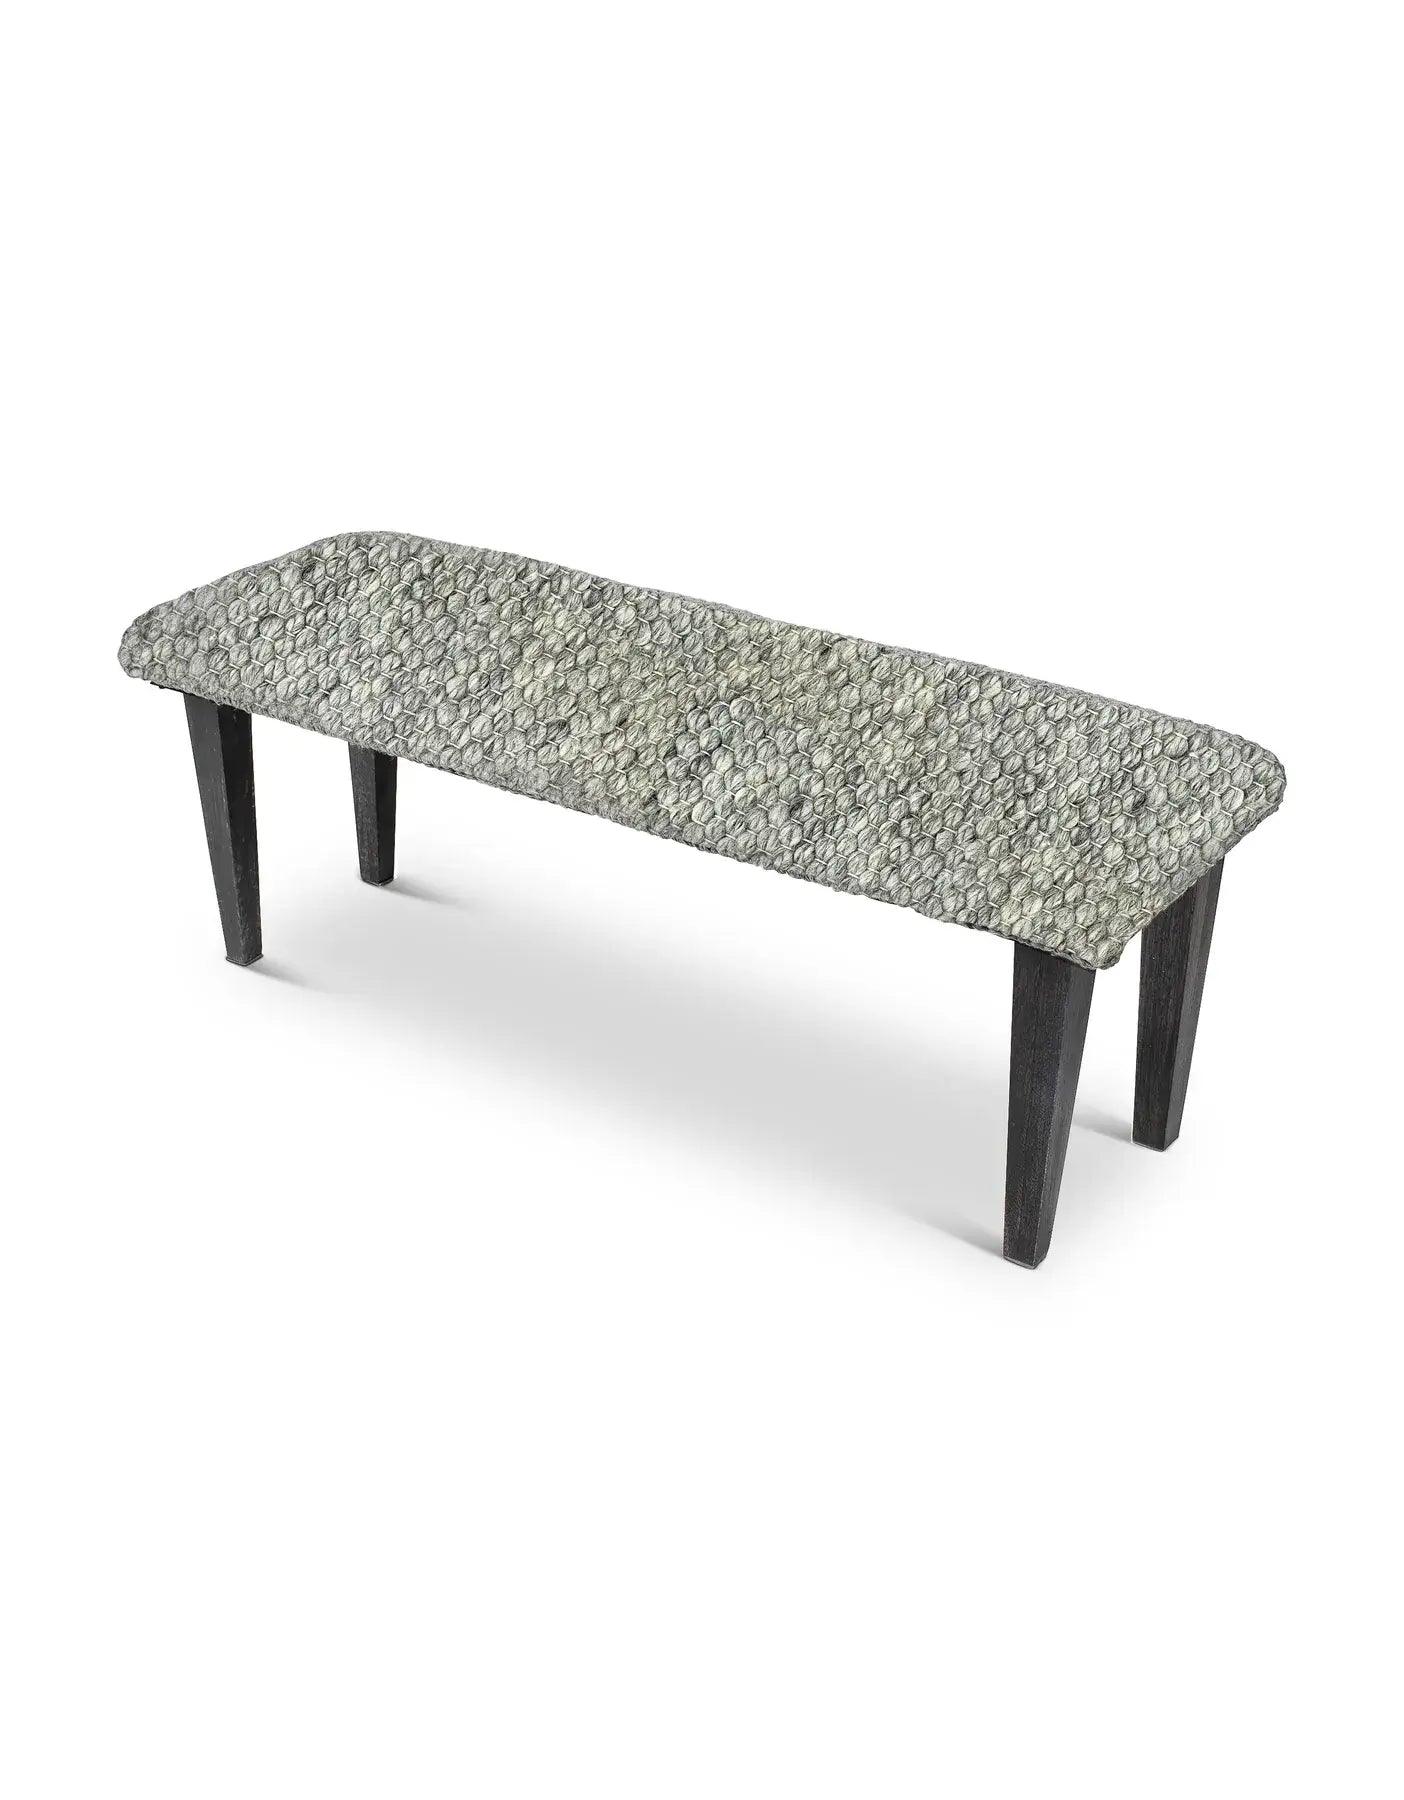 Handwoven Clean Grey Dining Room Table Bench - Nature Home Decor